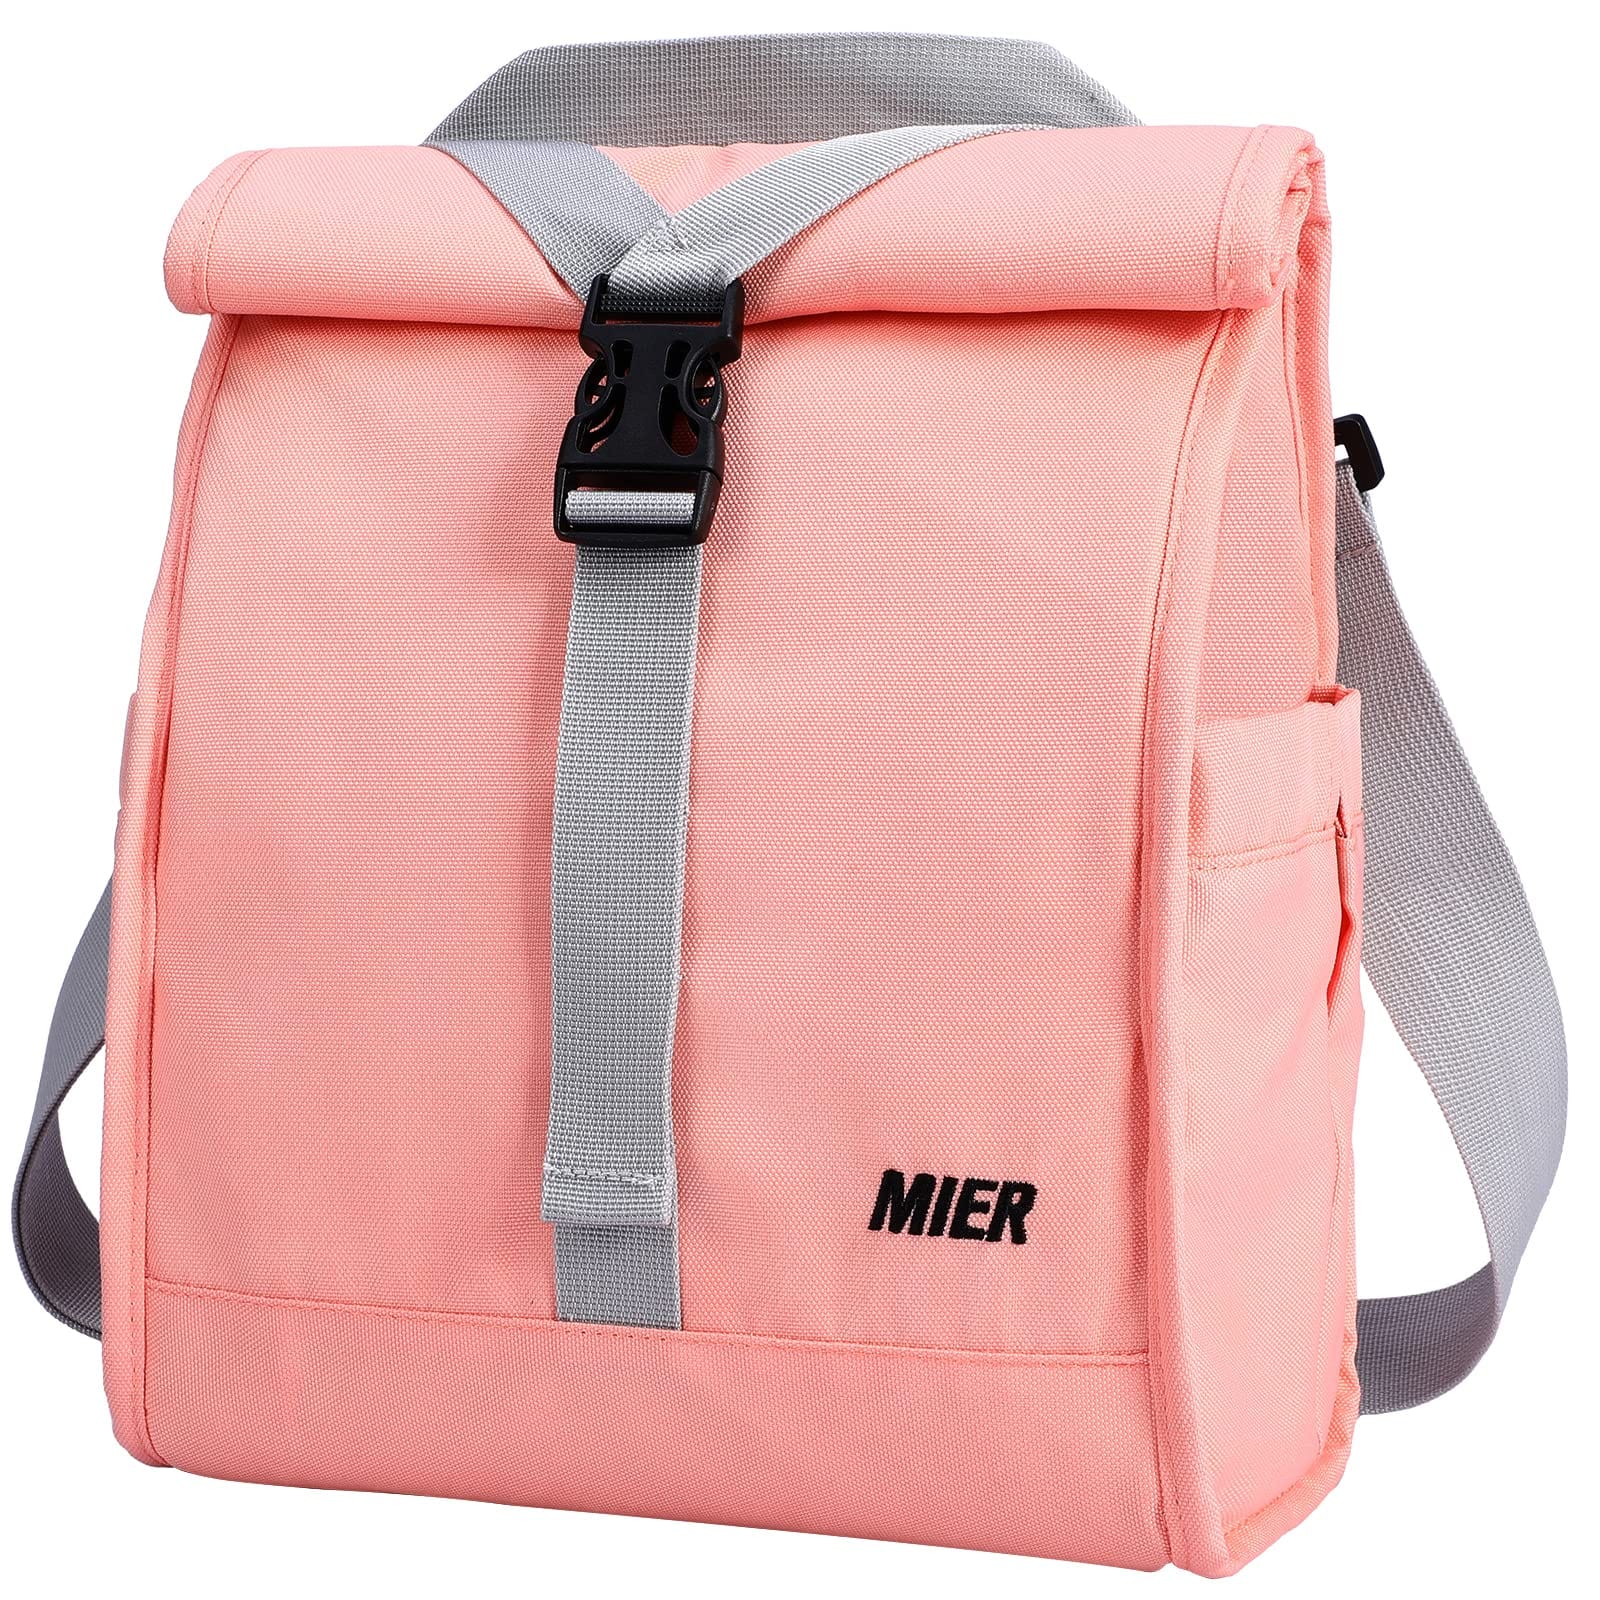 Insulated Lunch Bag Roll Top Lunch Box for Women Men, Pink